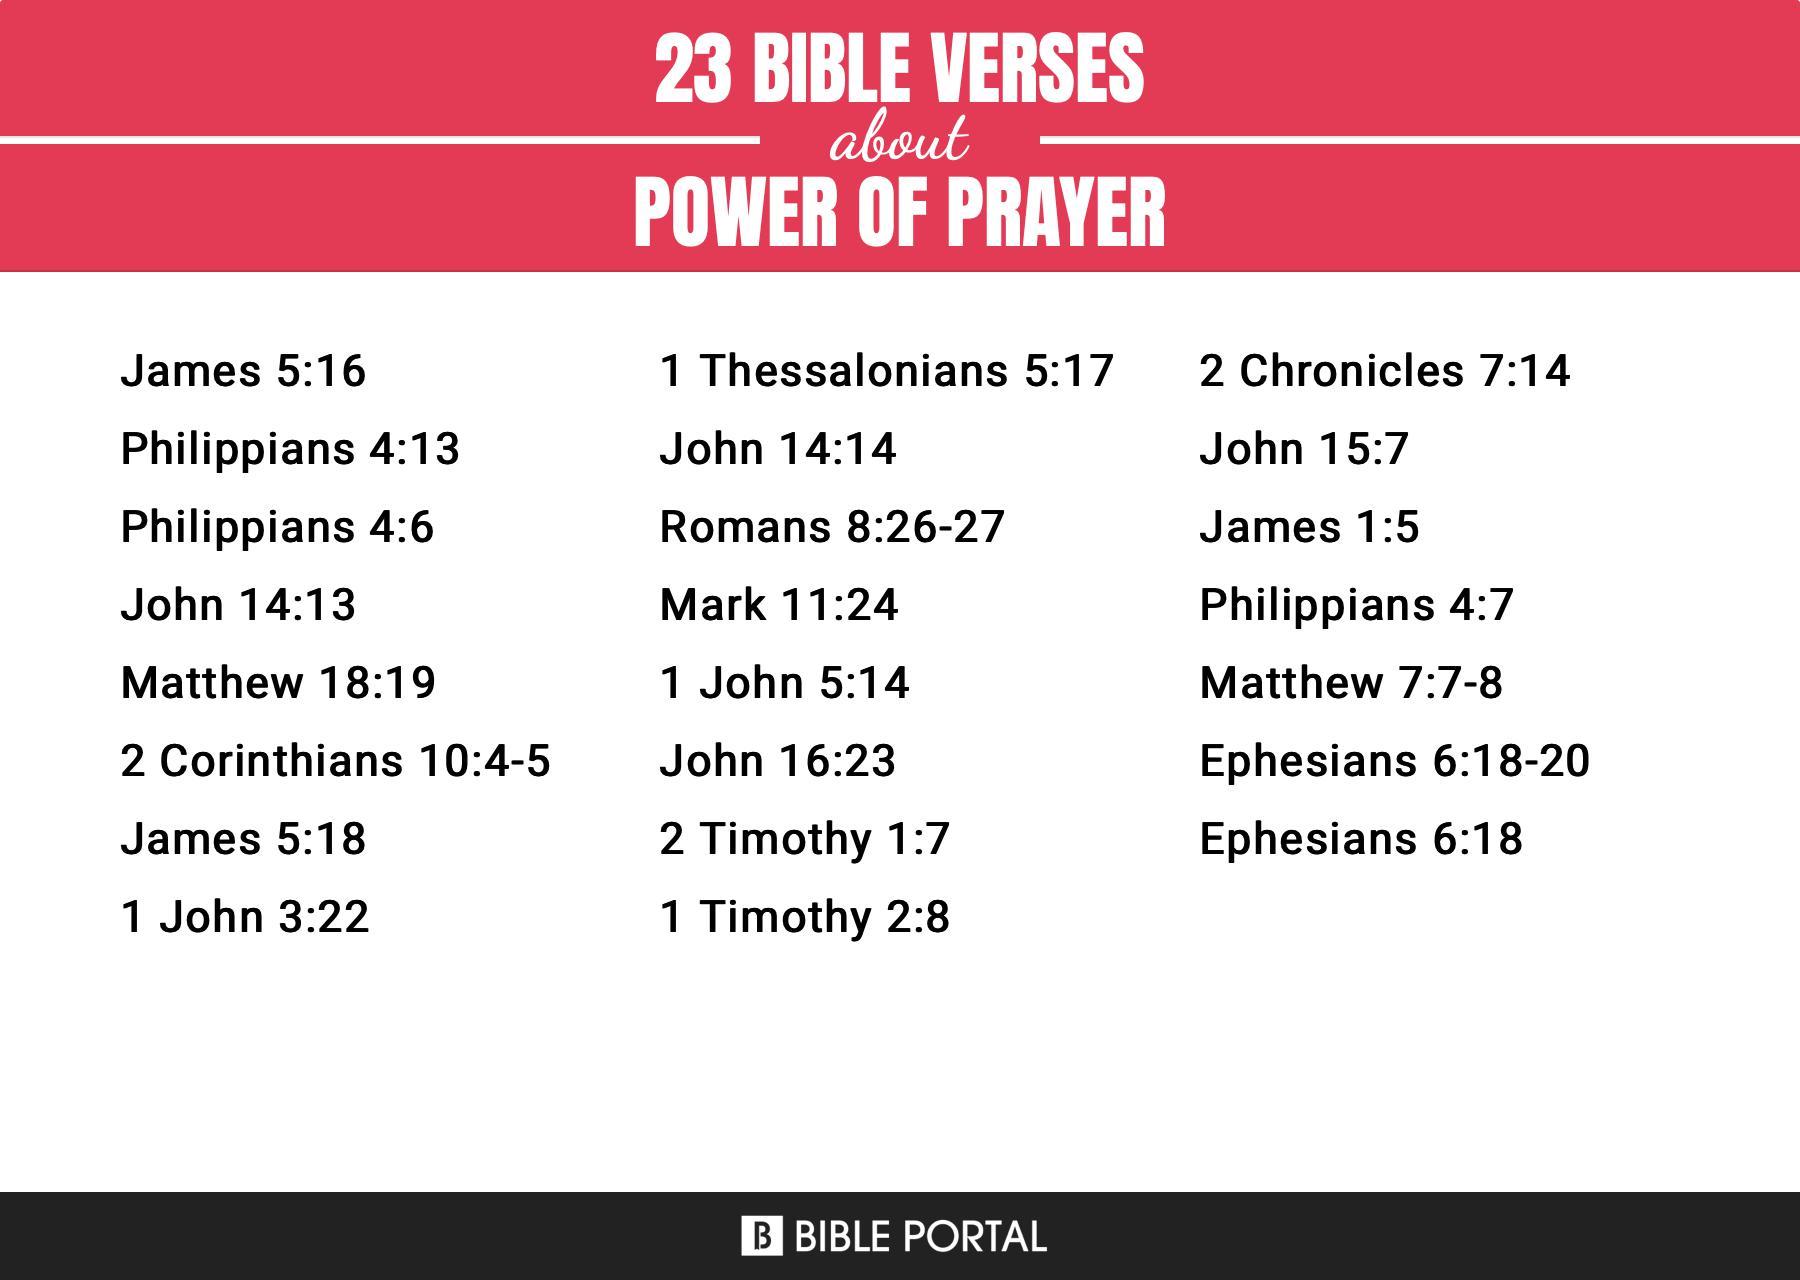 What Does the Bible Say about Power Of Prayer?